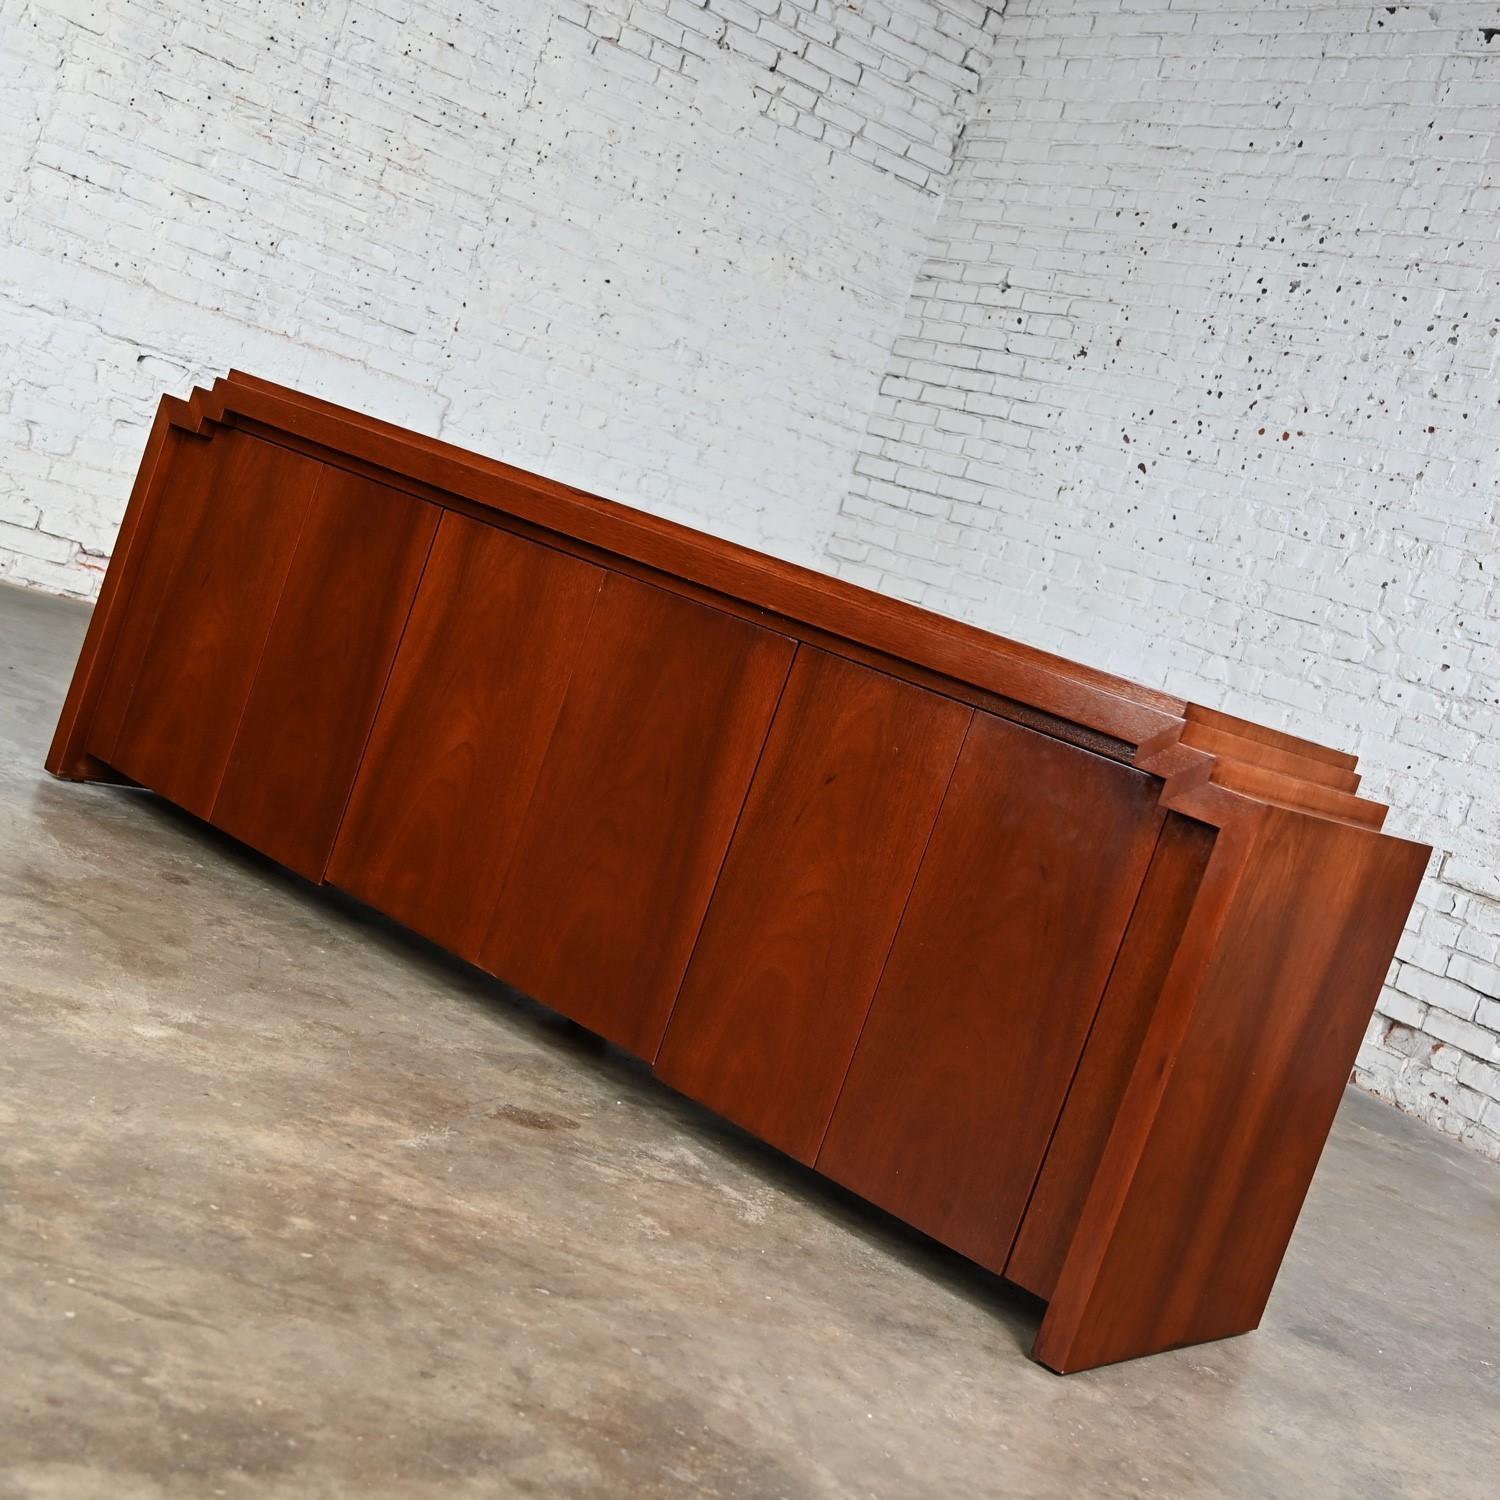 Stunning vintage Art Deco Revival to Postmodern custom step-down credenza, sideboard, buffet, or cabinet comprised of mahogany with 3 sets of double doors, push latches, and an adjustable single shelf behind each section. Beautiful condition,